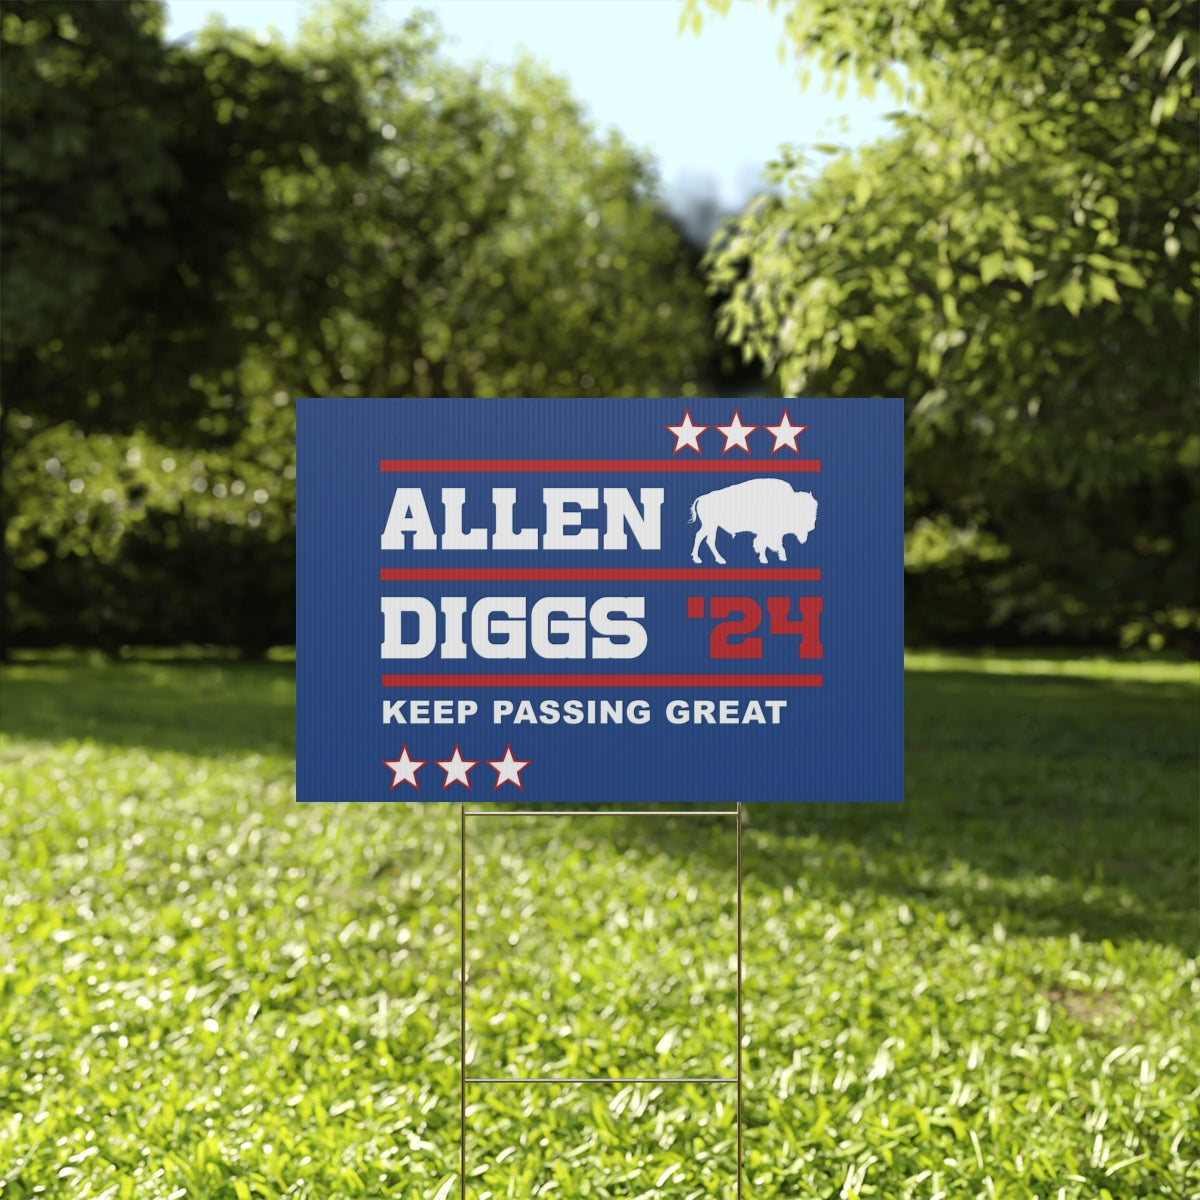 Allen Diggs 24 Keep Passing Great Yard Sign